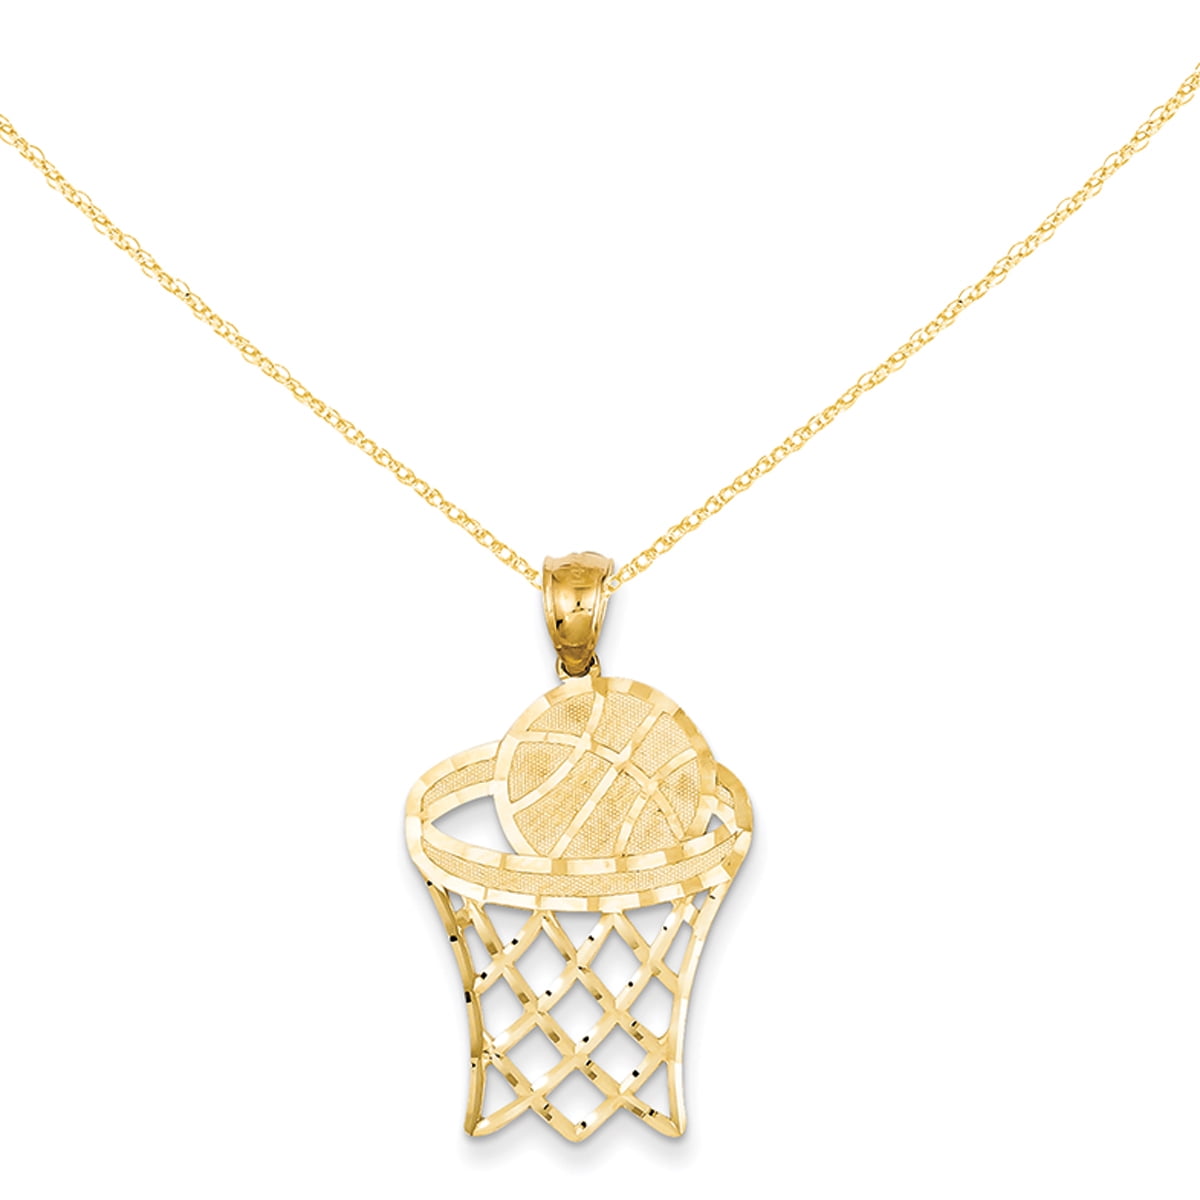 Jewels By Lux 10K Rose and Yellow Two Tone Gold Basketball Hoop with Ball Pendant